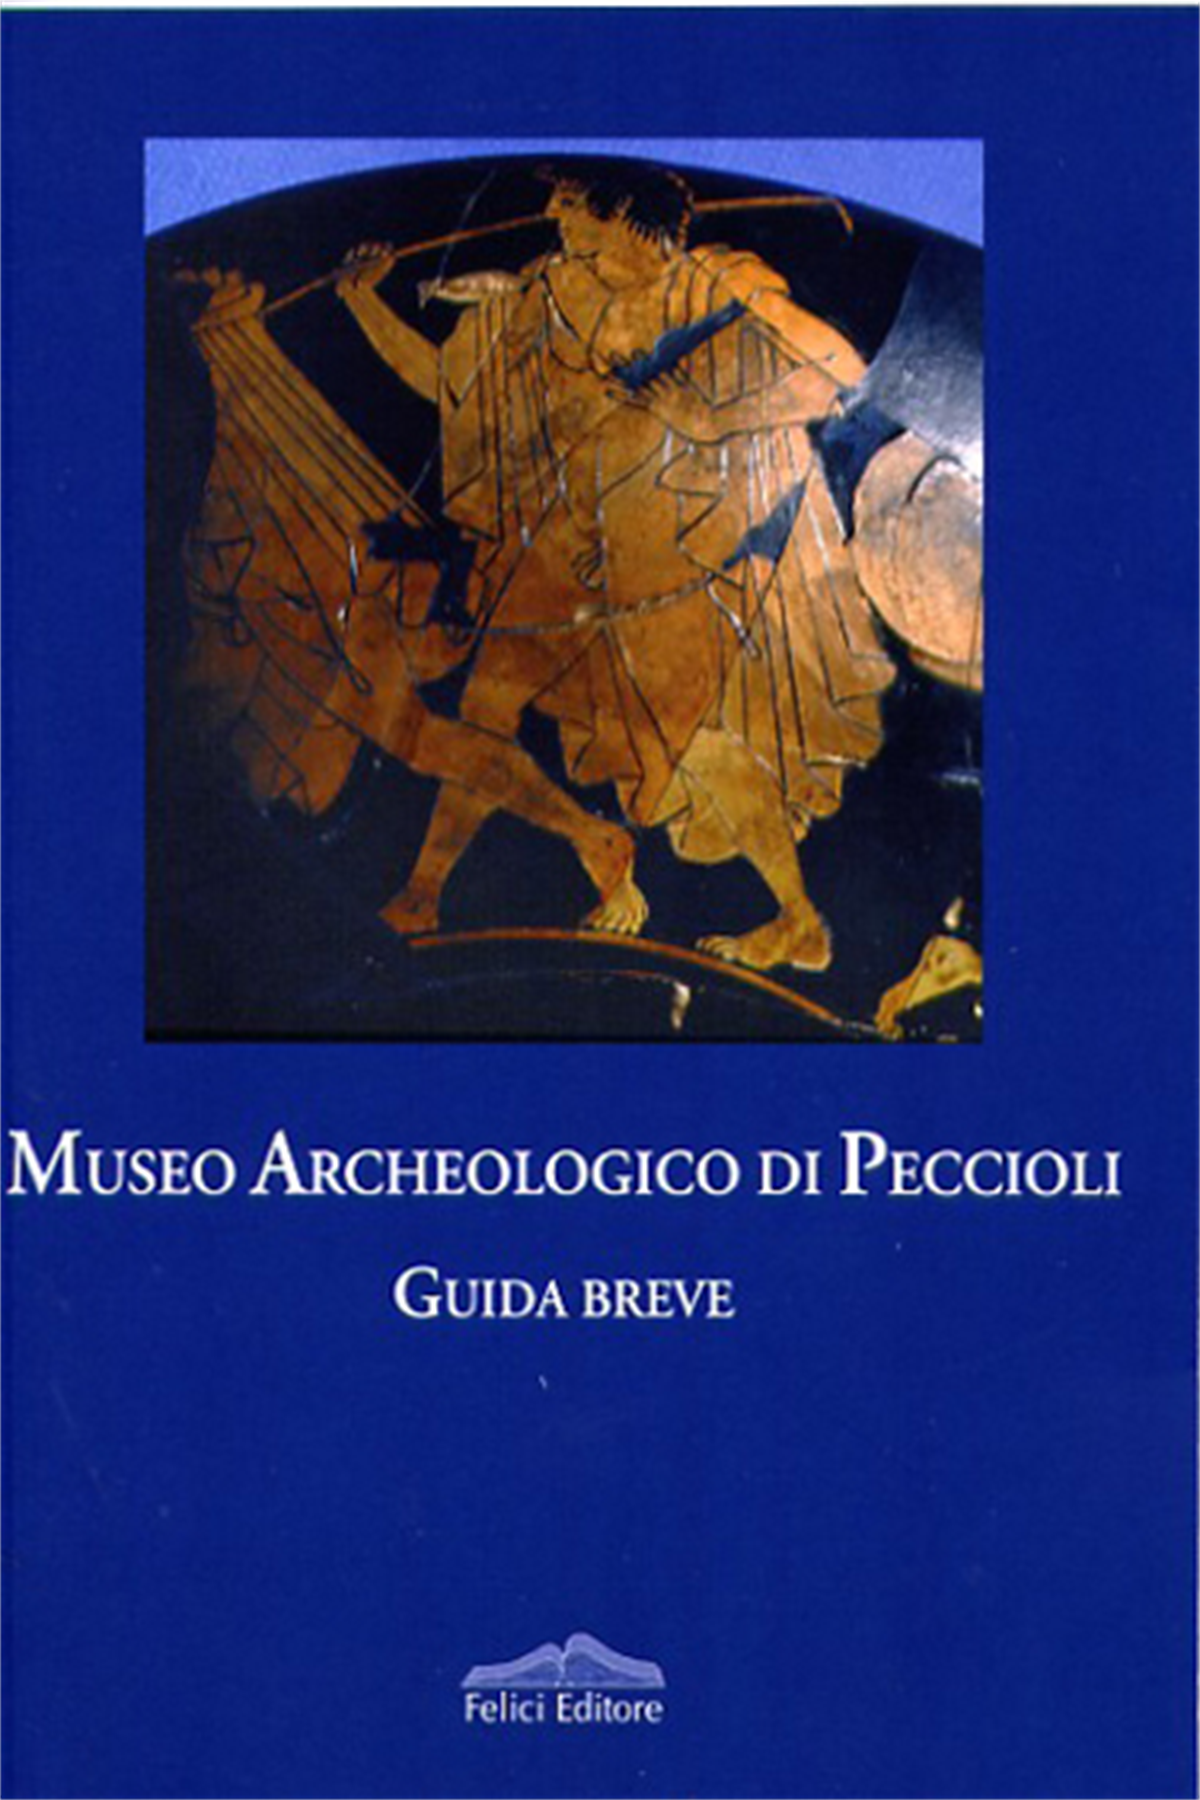 The Peccioli Archaeological Museum: A Short Guide.